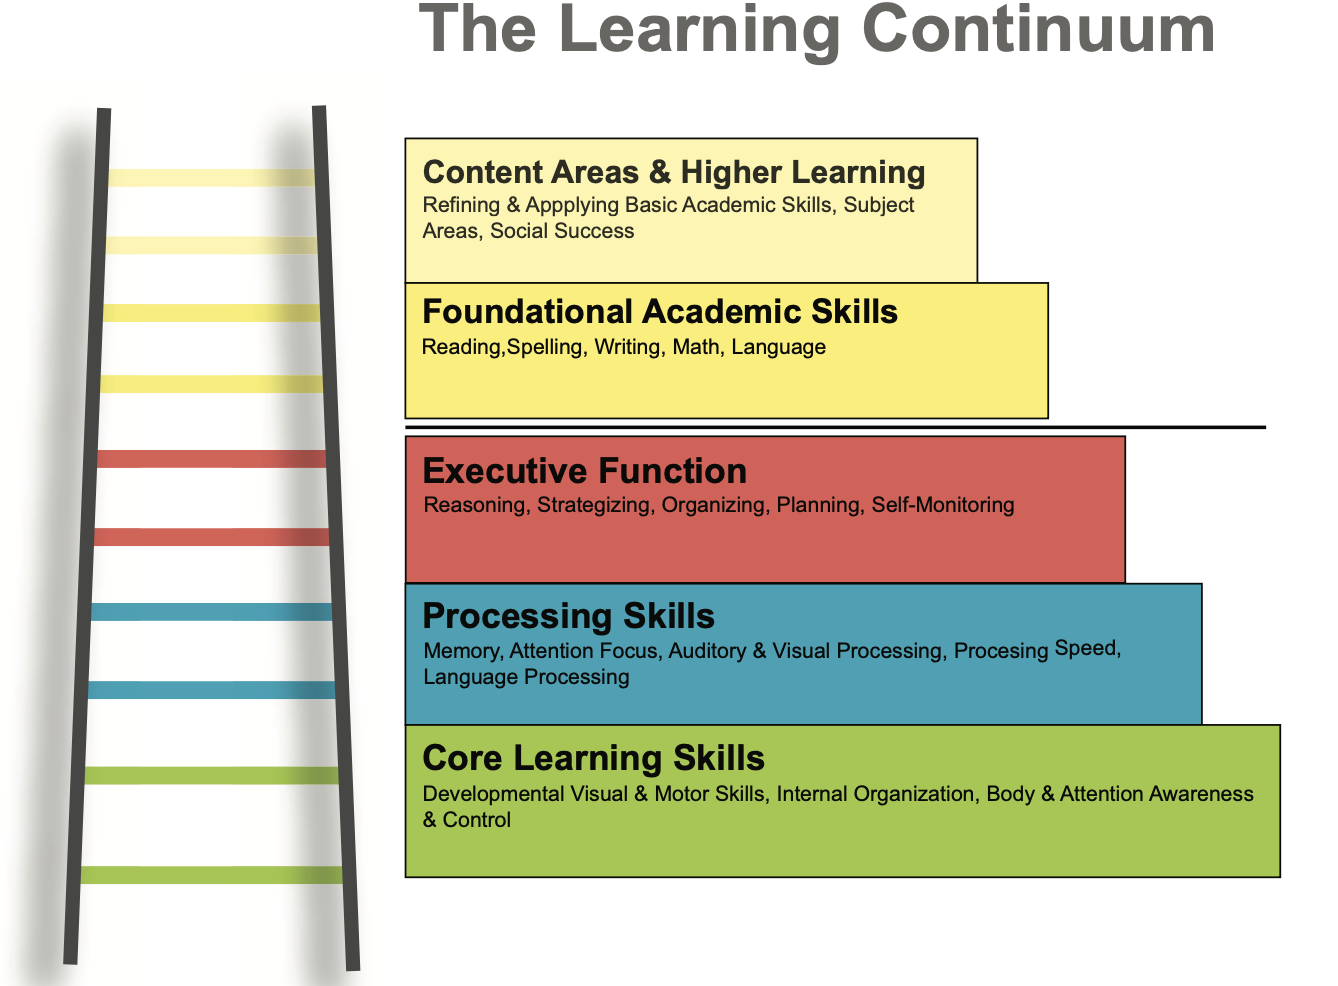 TLC - The Learning Continuum graphic